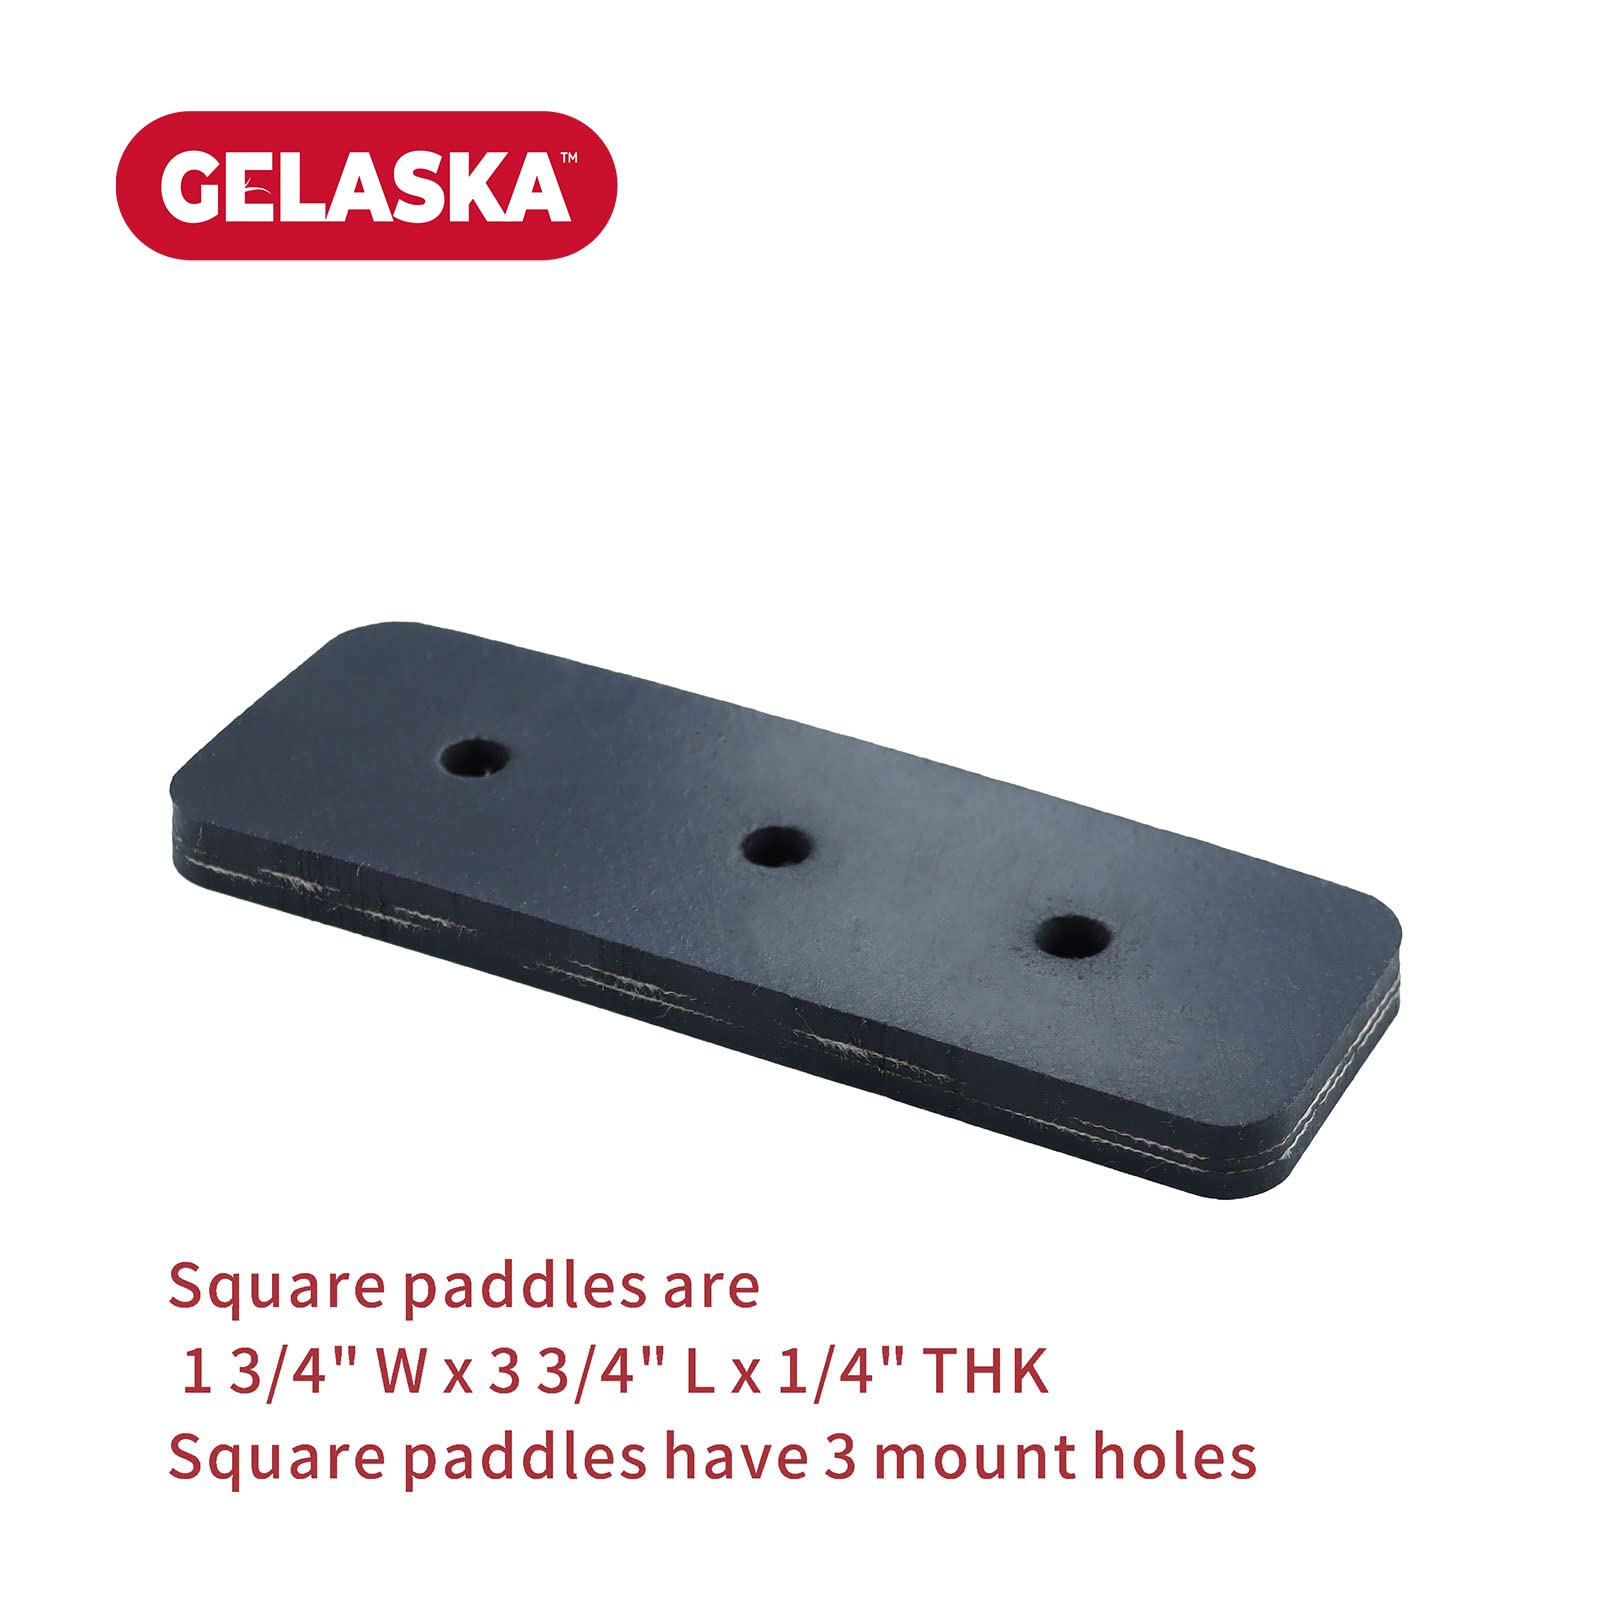 GELASKA 302565MA Rubber Auger Paddles with 55323MA Scraper Blade 1501122MA Cable 762259MA Cable Replaces 302565, 1687312YP, 1687312, 1687312SM, 723006 for Craftsman Murray Snapper 20" 21" Snowthrowers